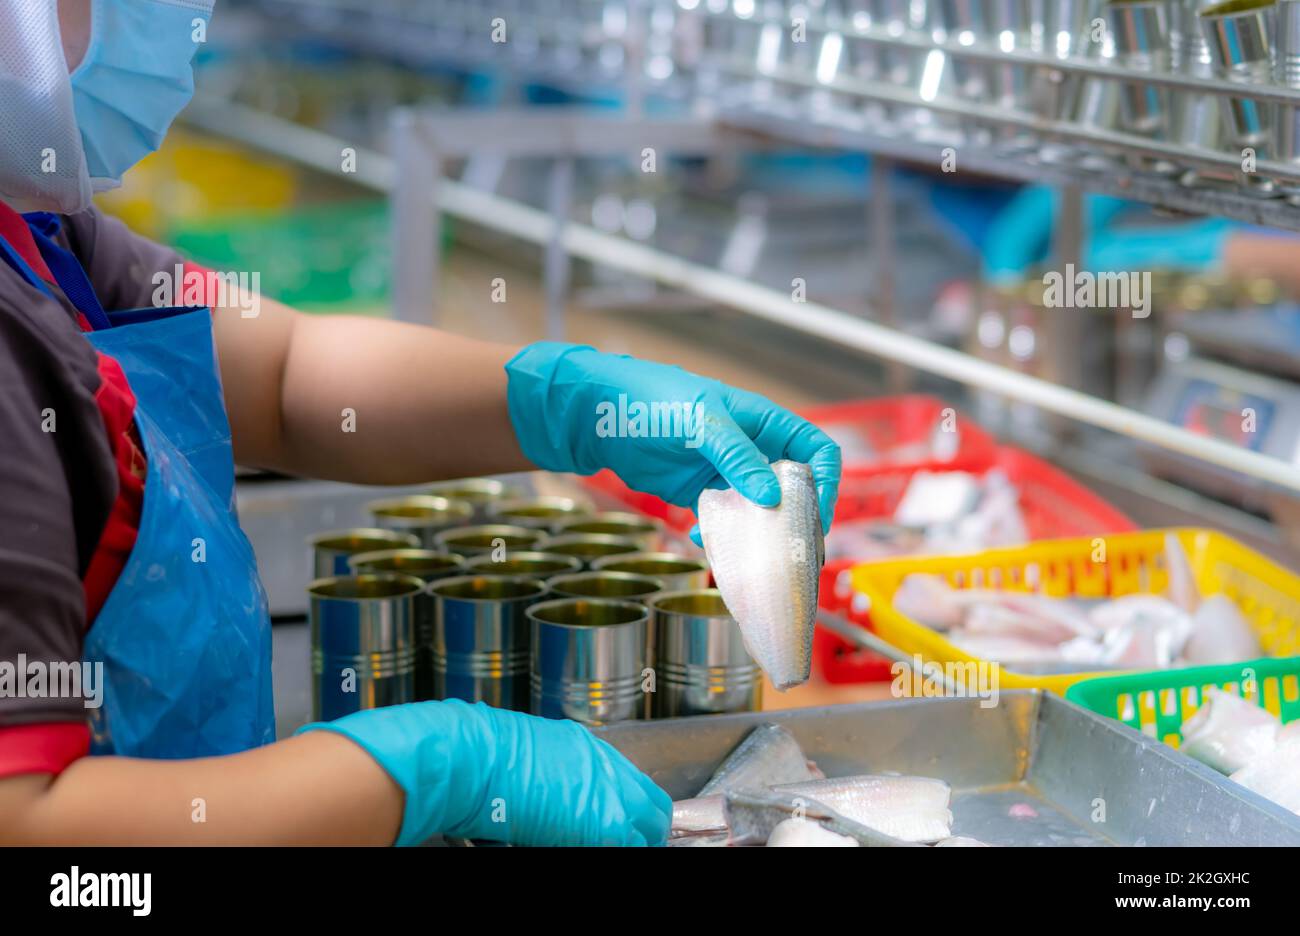 Worker working in canned food factory. Food industry. Canned fish factory. Worker's hand holding sardine to fill in a can. Worker in food processing production line. Food manufacturing industry. Stock Photo